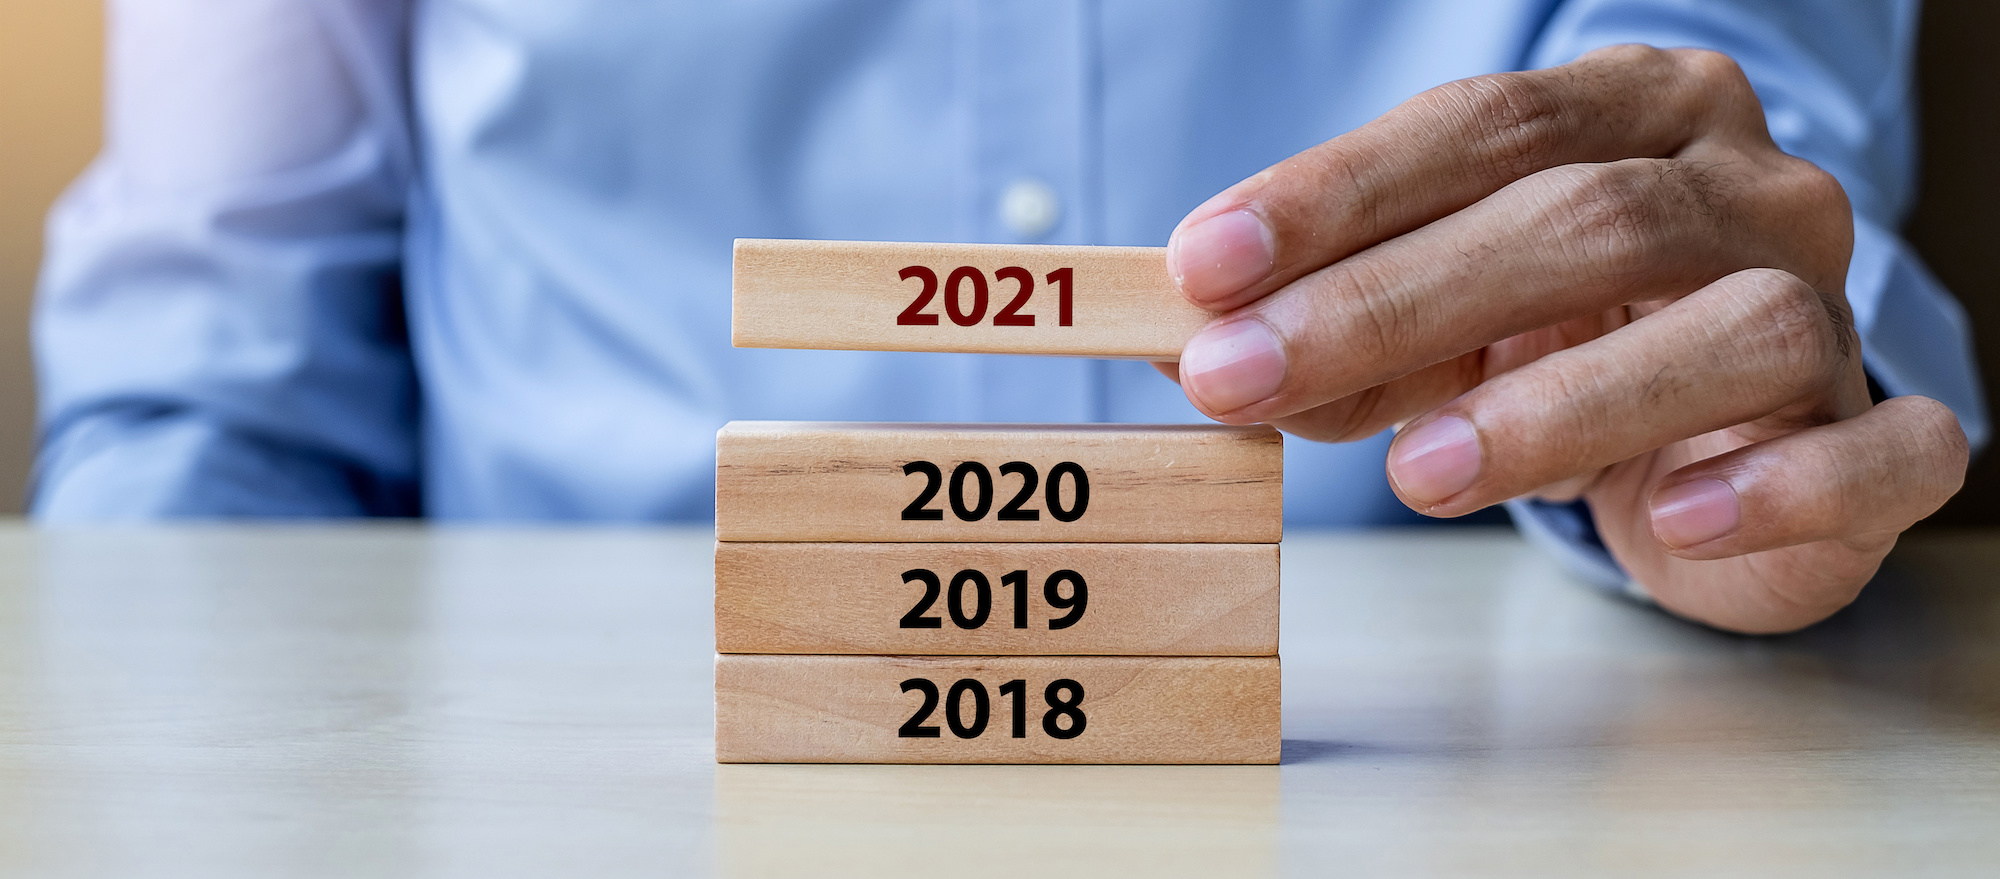 We Were BUILT for This: Making Your Business “2021-Ready” with Quest